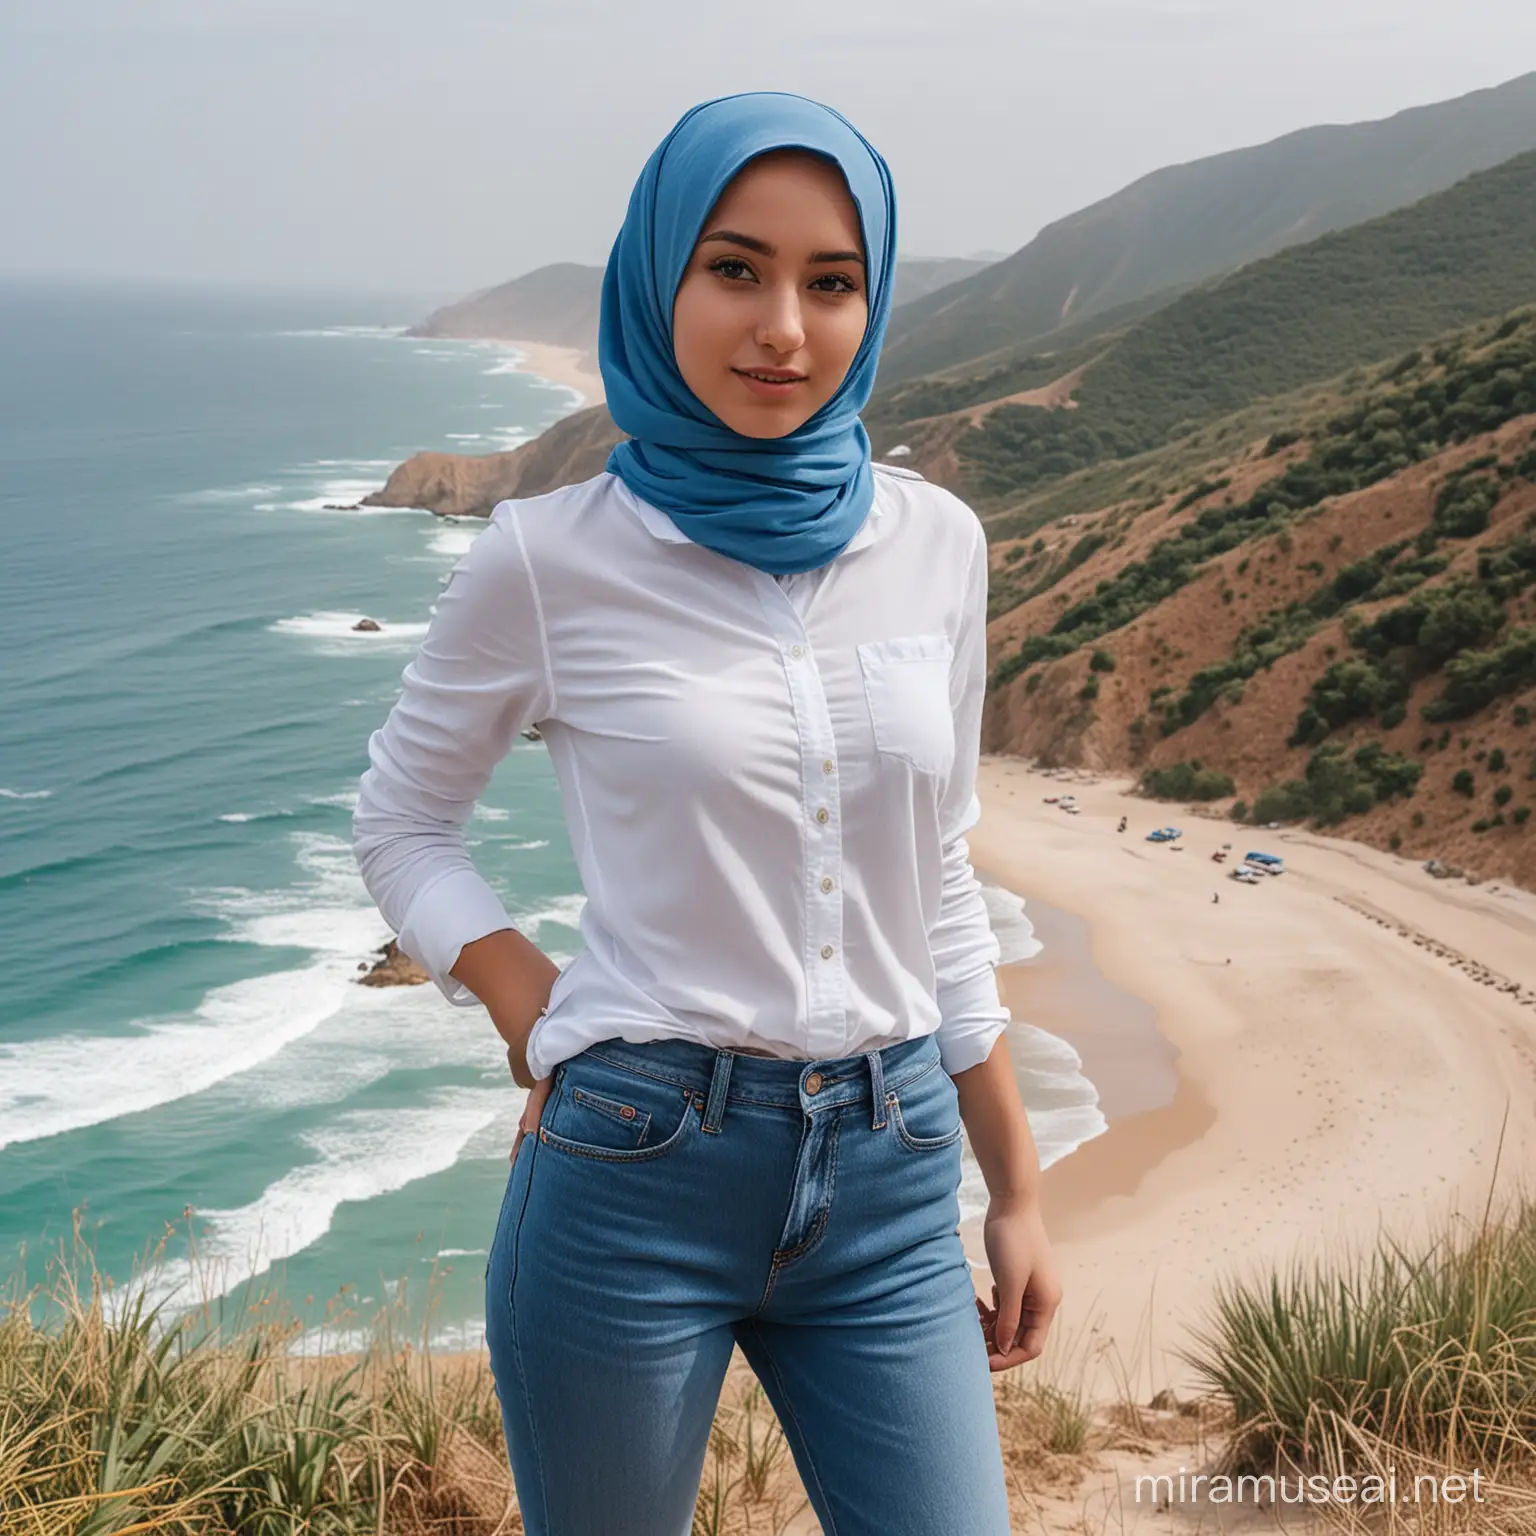 Young Woman in Blue Hijab Overlooking Serene Beach from Hilltop